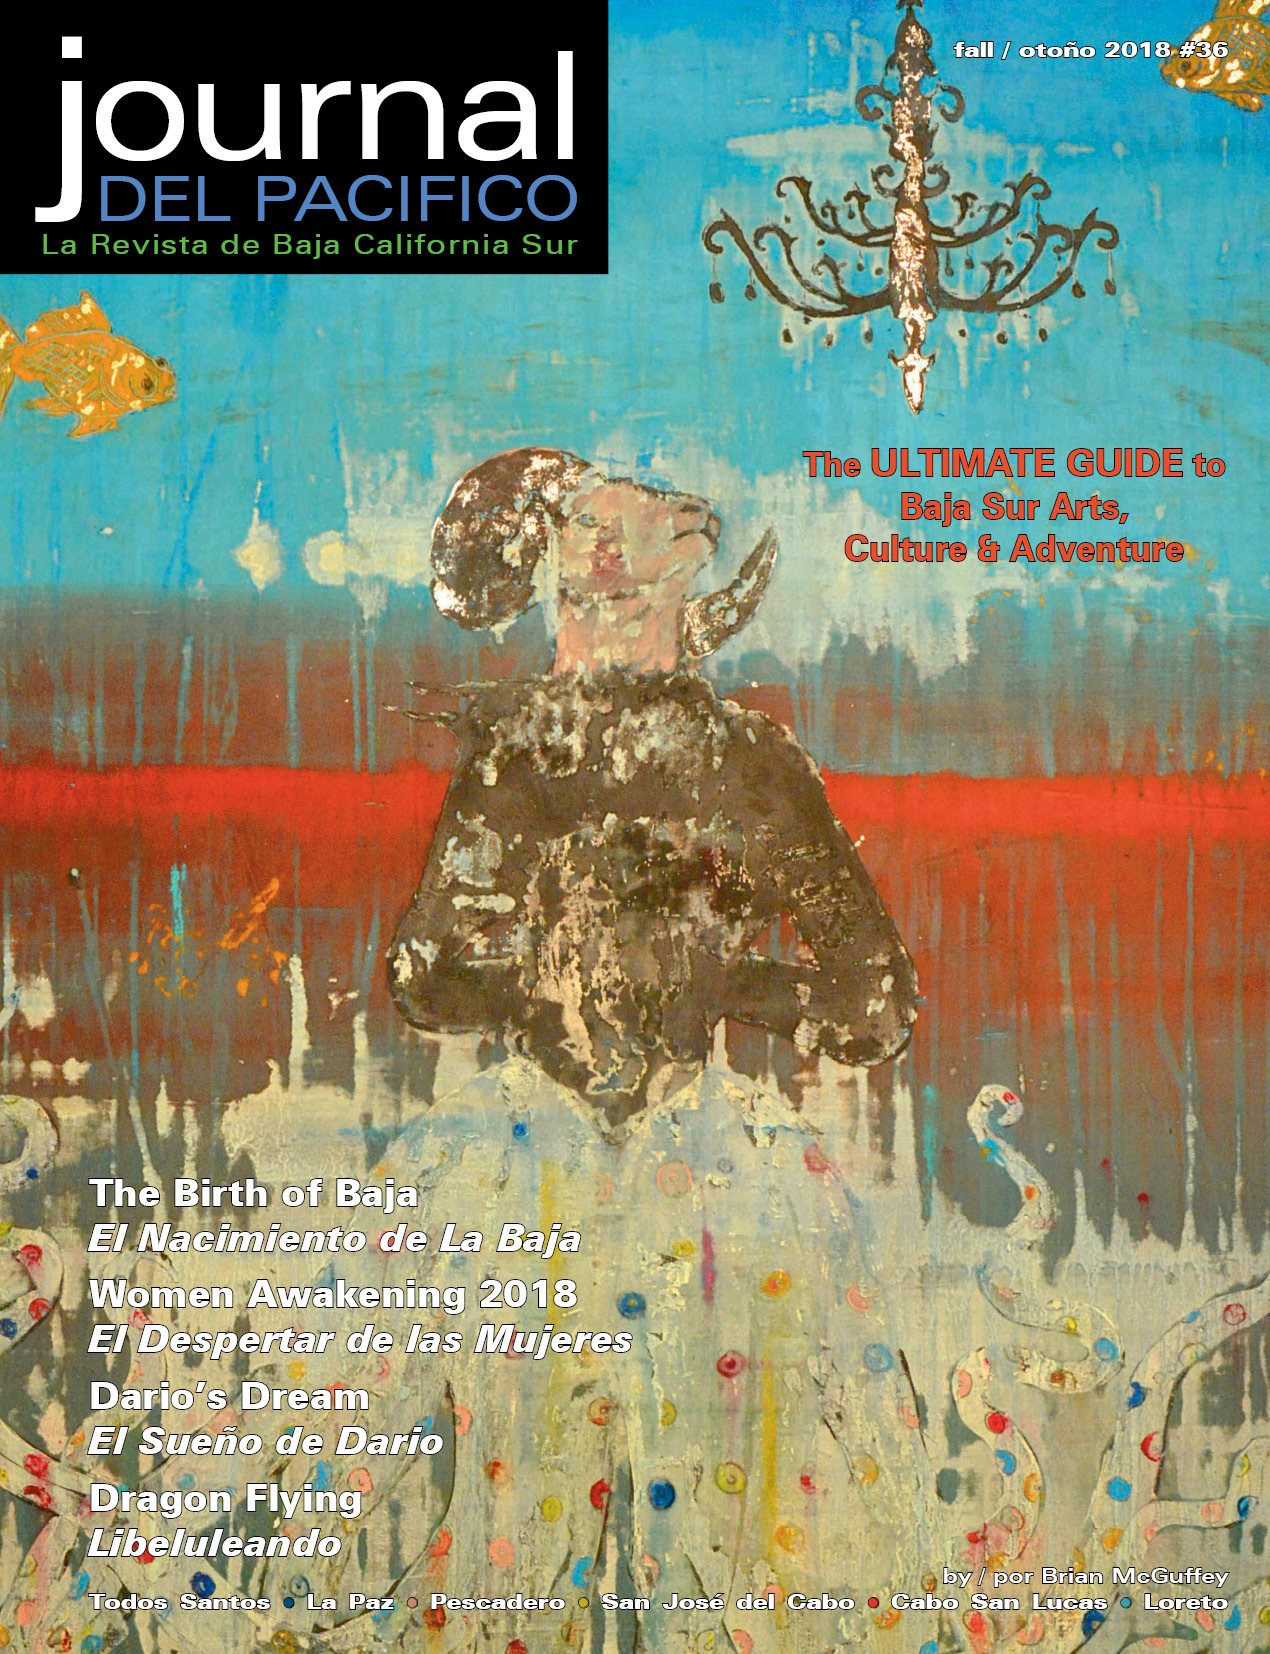 Fall/Otoño 2018 Issue of Journal del Pacifico